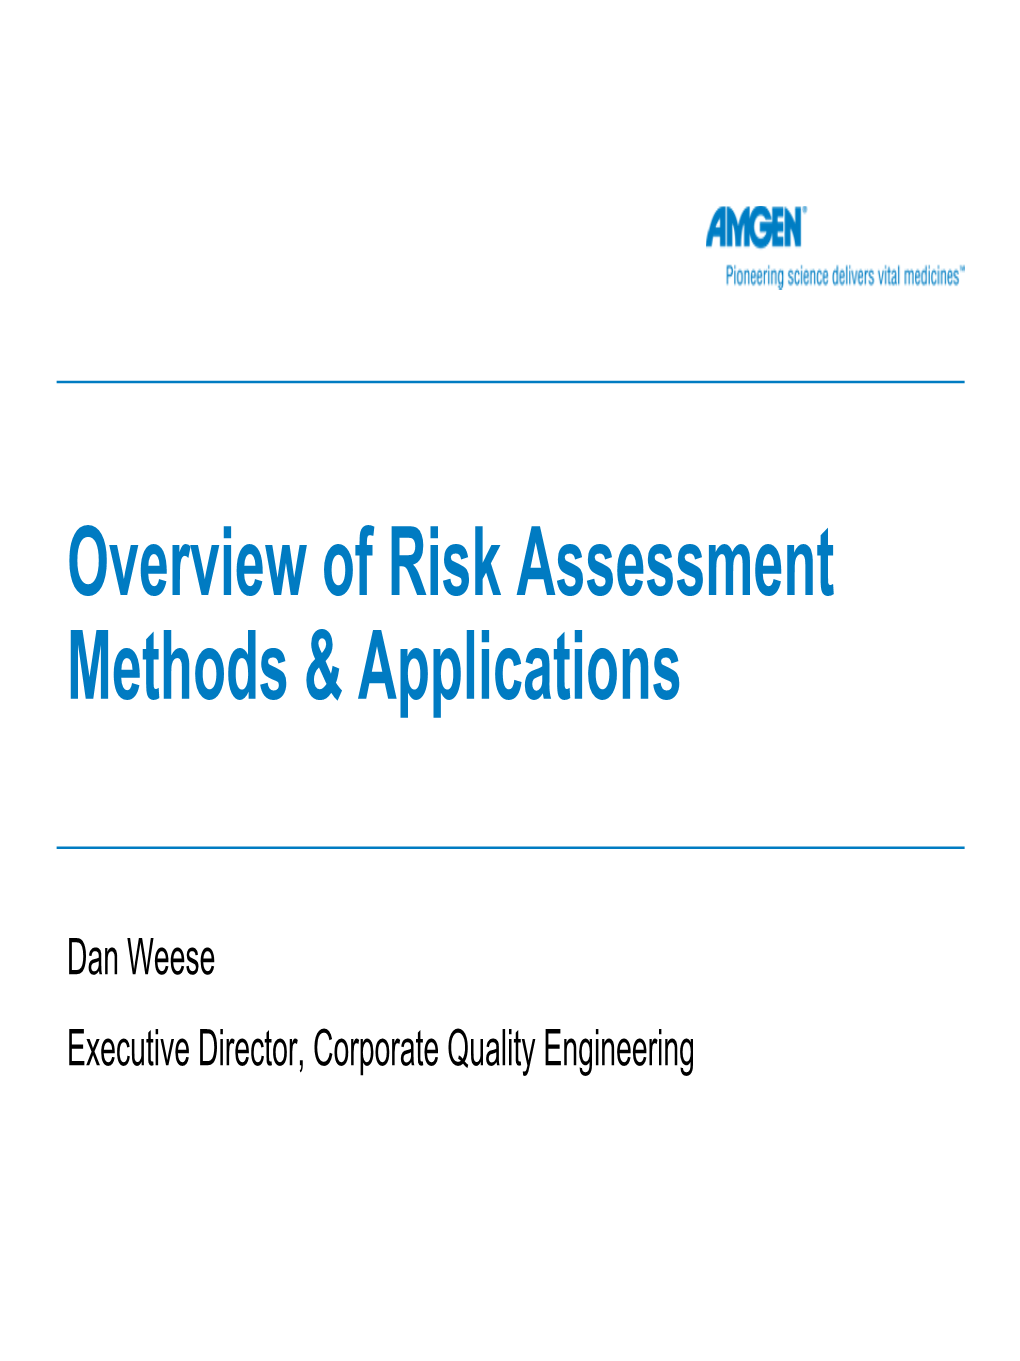 Overview of Risk Assessment Methods & Applications